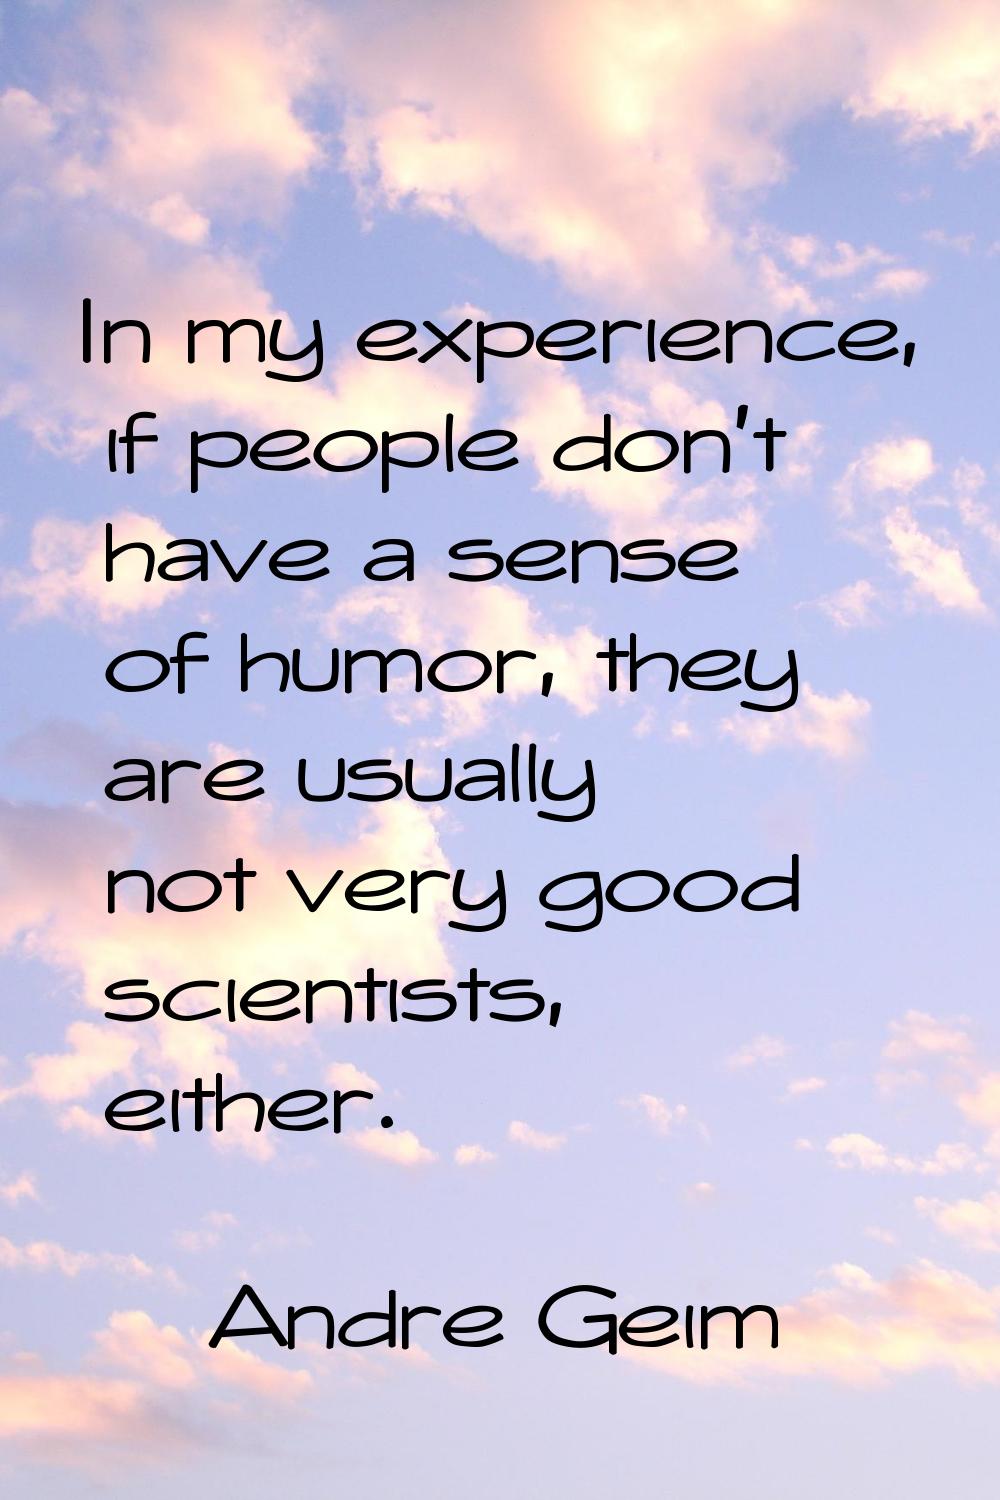 In my experience, if people don't have a sense of humor, they are usually not very good scientists,